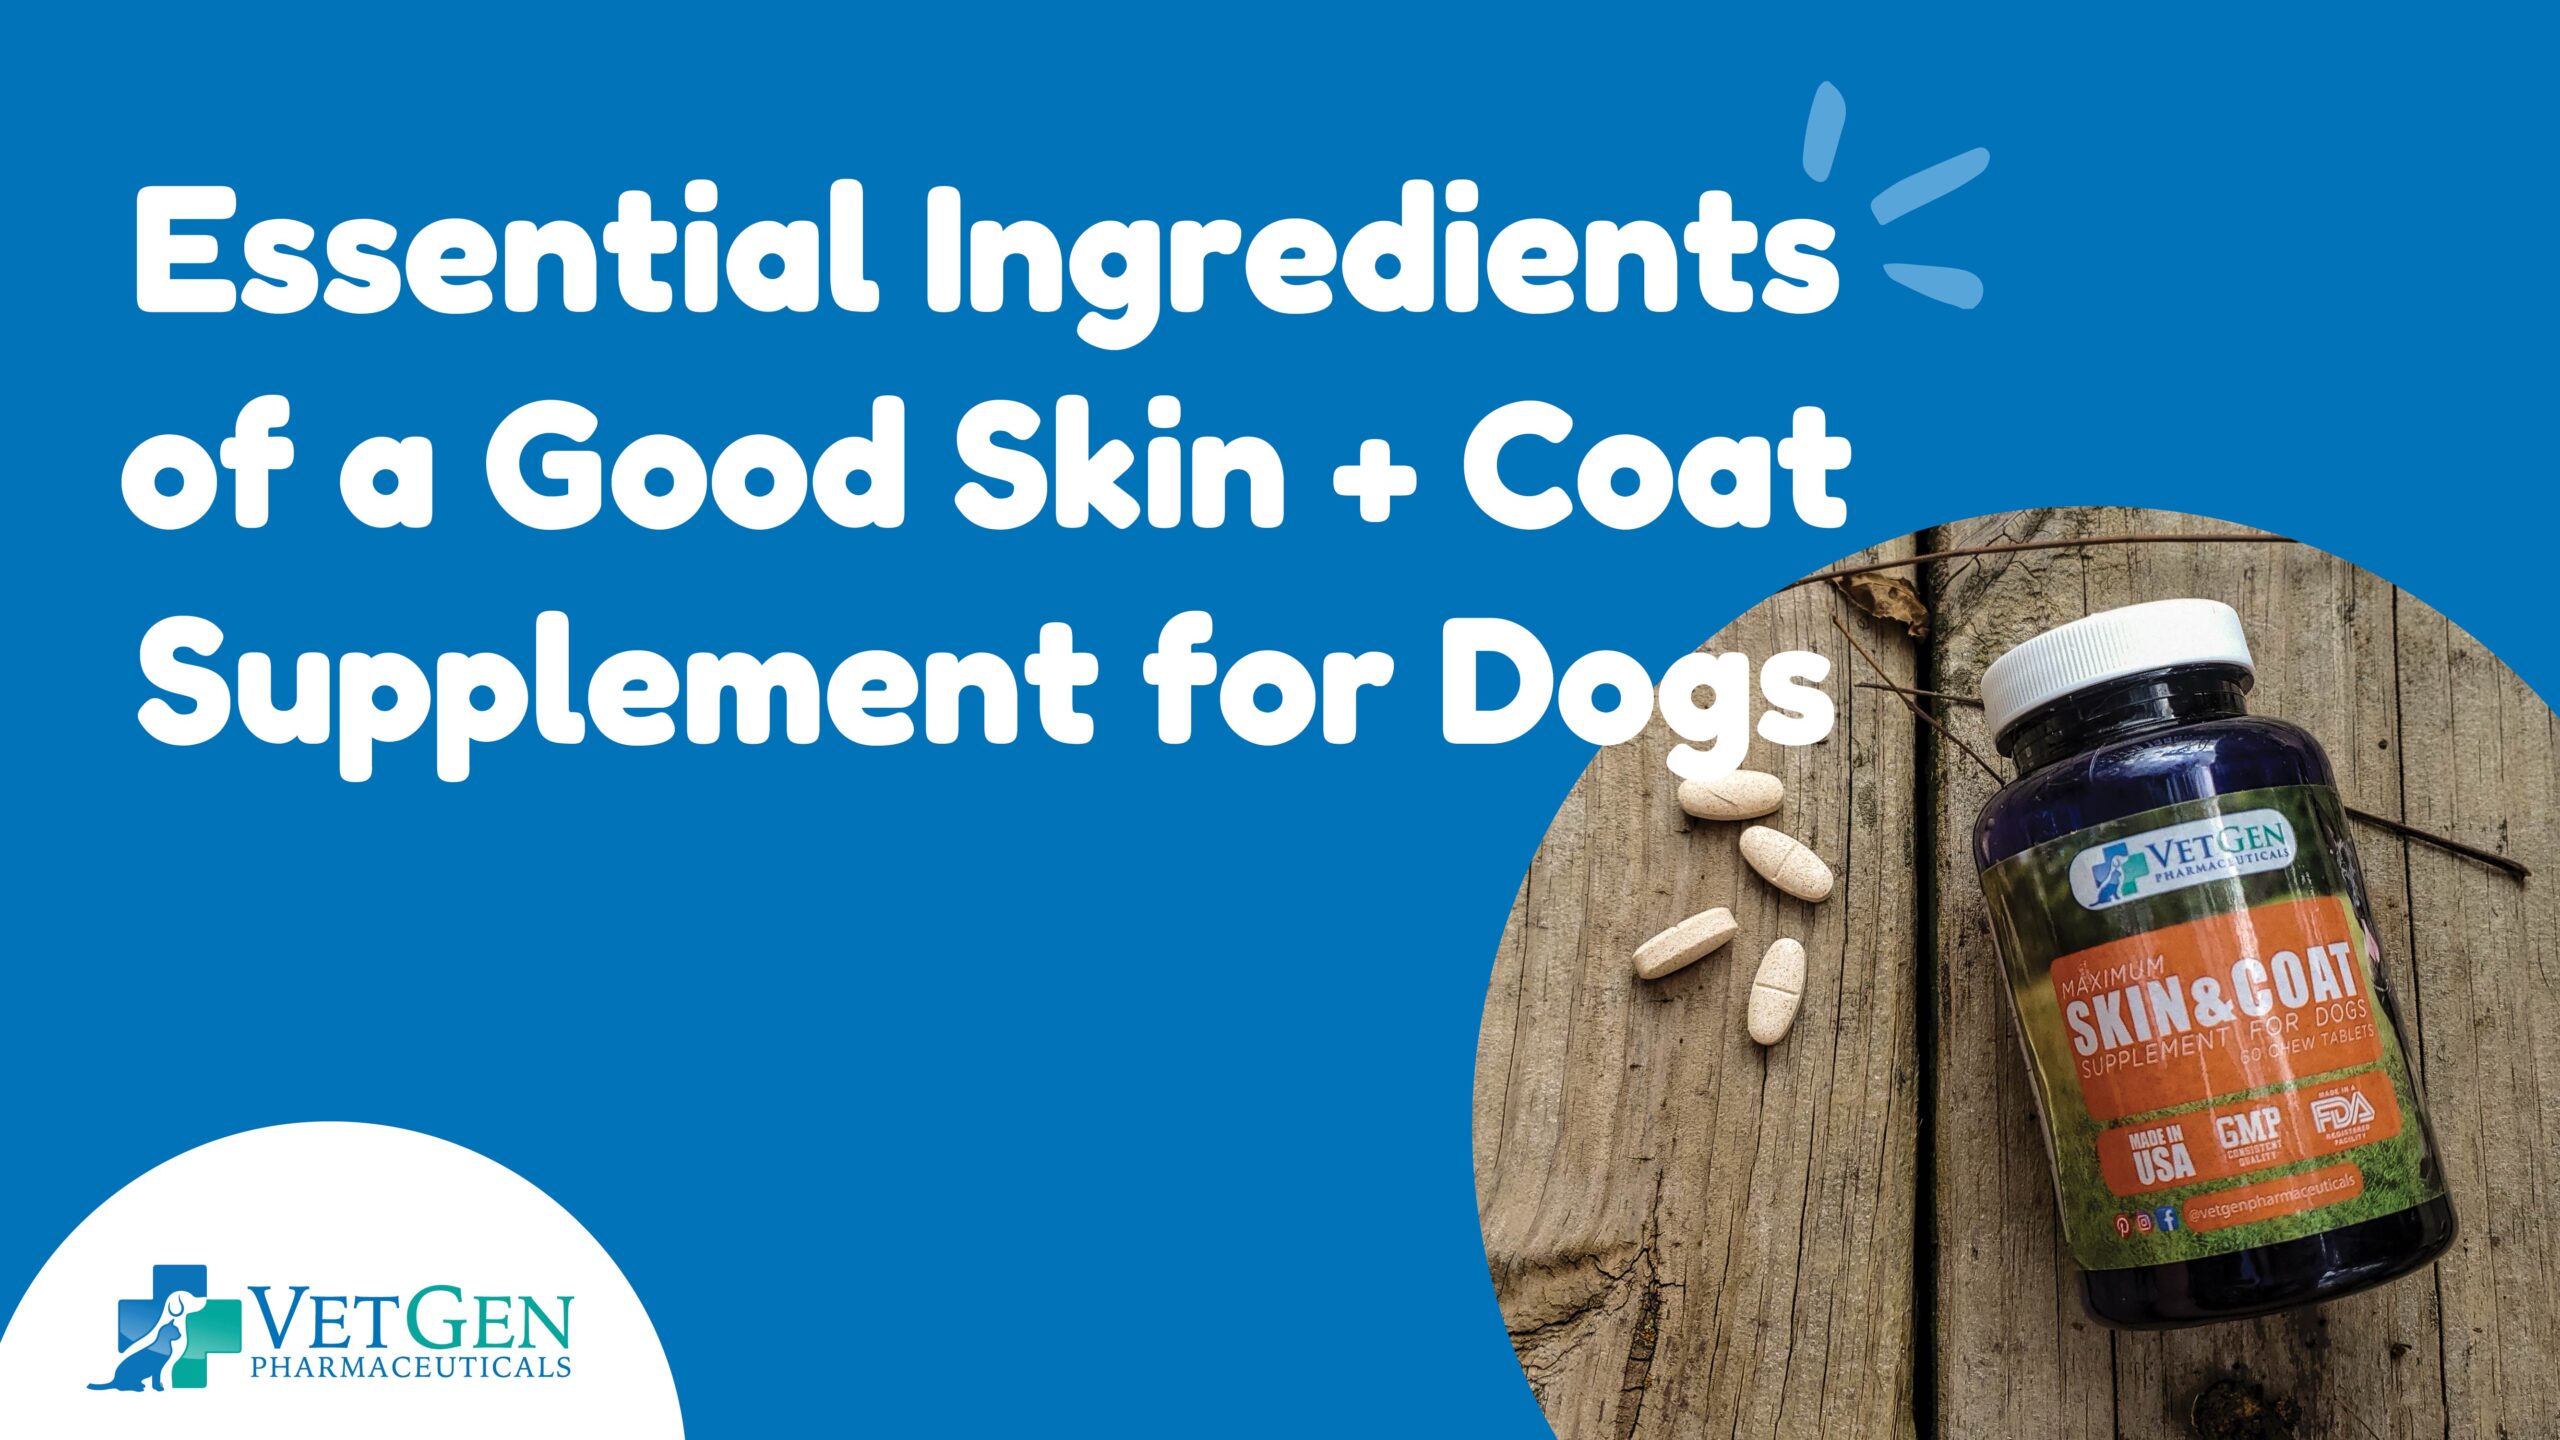 Essential Ingredients of a Good Skin + Coat Supplement for Dogs